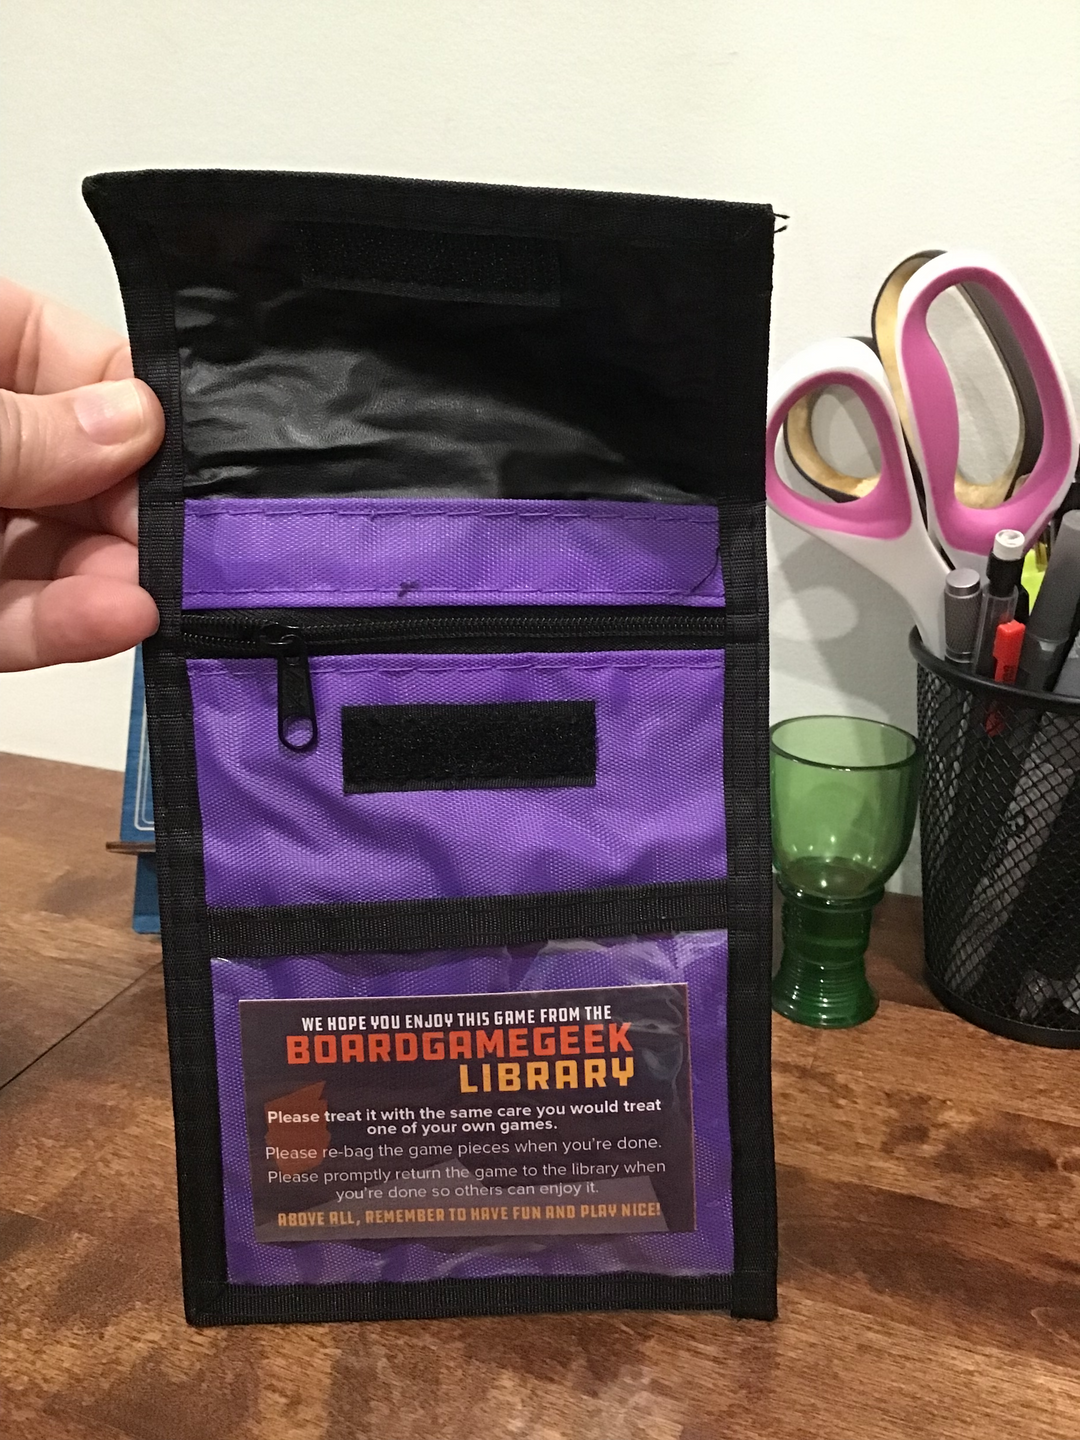 A photo of a purple neck wallet with black trim, with the top flap flipped up, multiple pockets, and a business card for the "BoardGameGeek Library" in a plastic window pocket at the bottom.